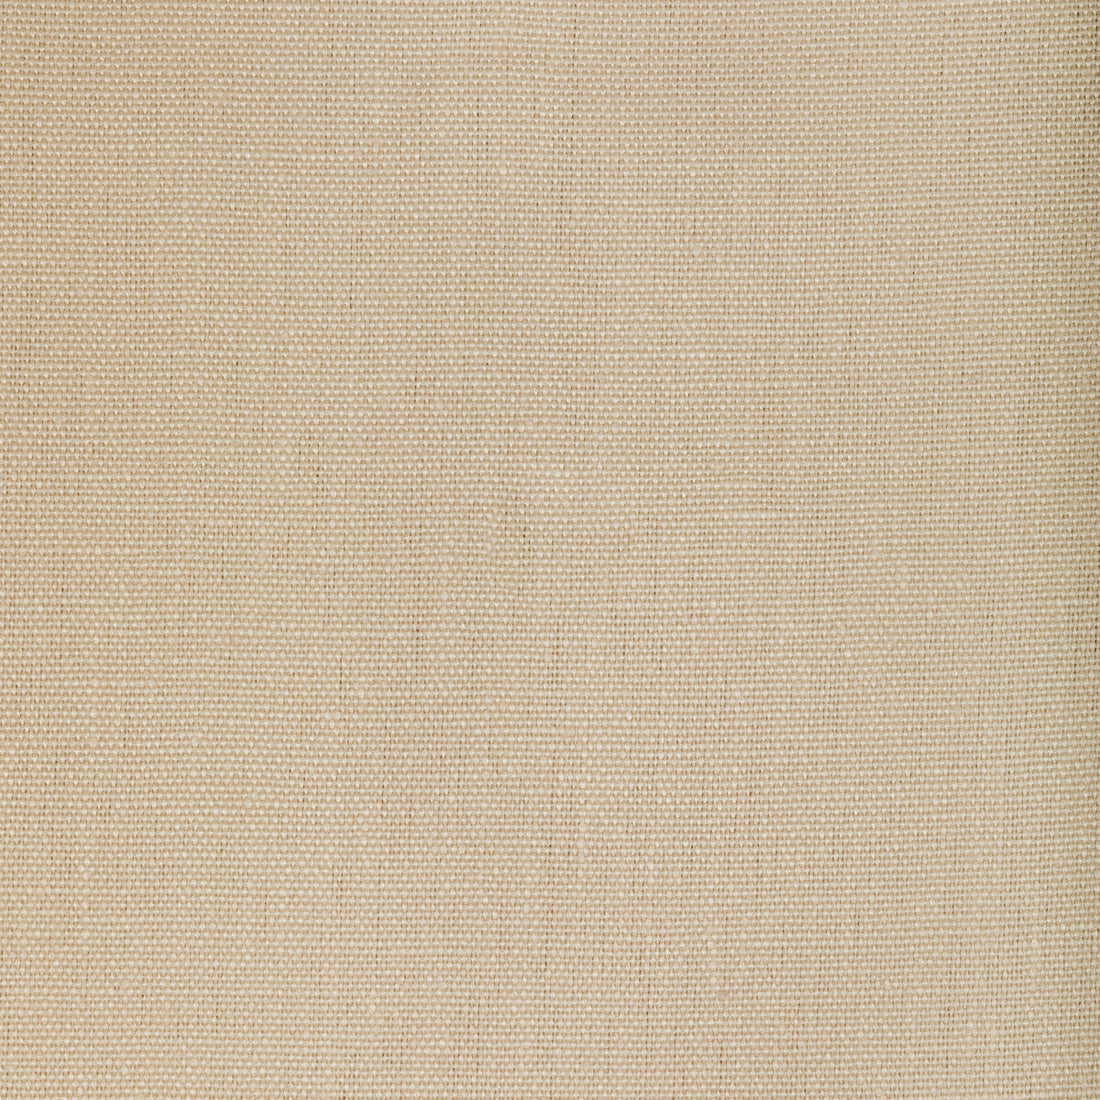 Kravet Basics fabric in 32260-116 color - pattern 32260.116.0 - by Kravet Basics in the Perfect Plains collection